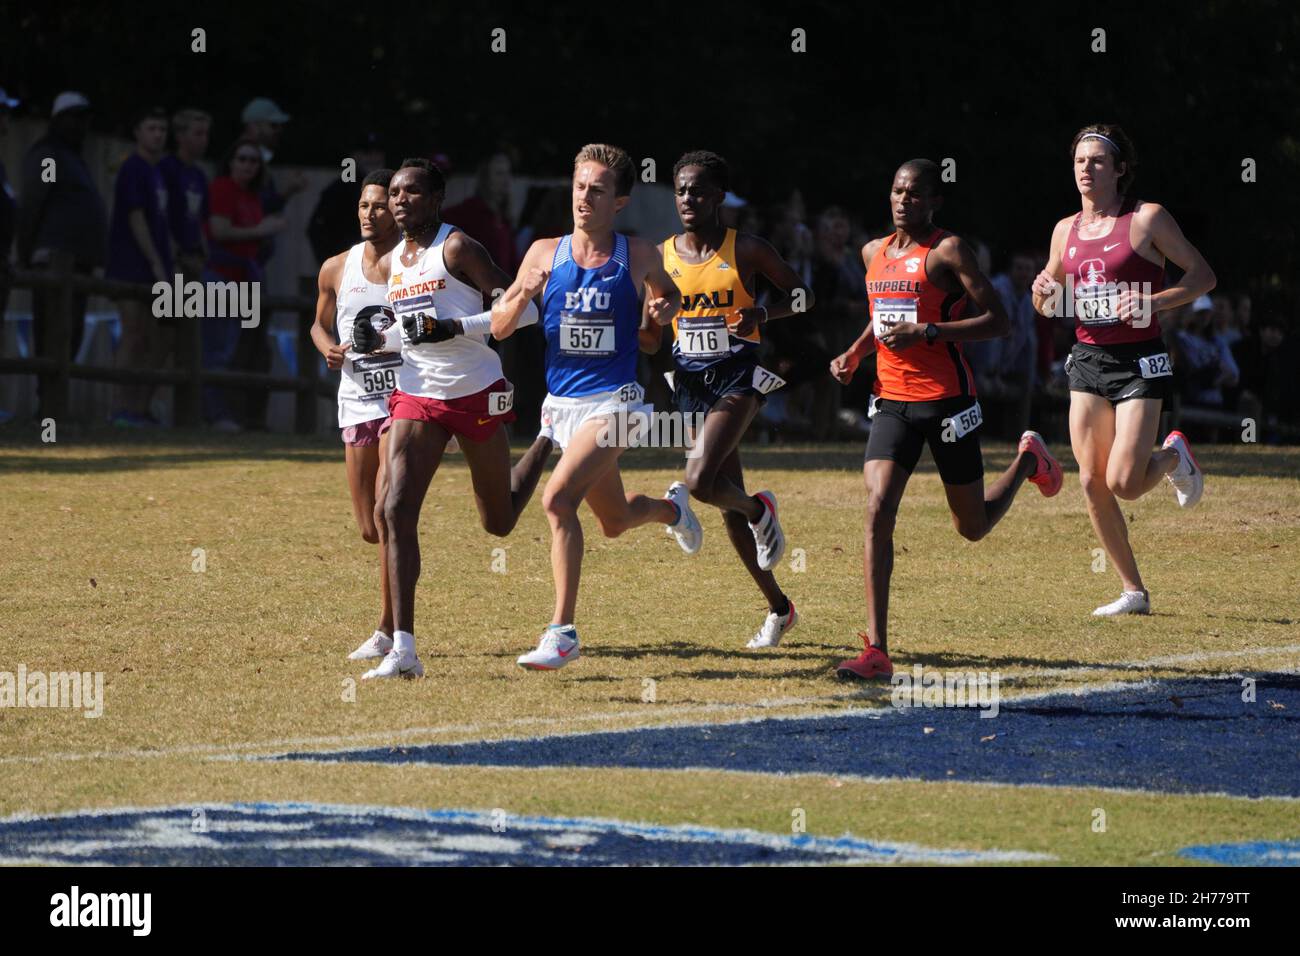 Wesley Kiptoo of Iowa State, Conner Mantz and Athanas Kioko of Campbell lead the men's race during the NCAA cross country championships at Apalachee R Stock Photo